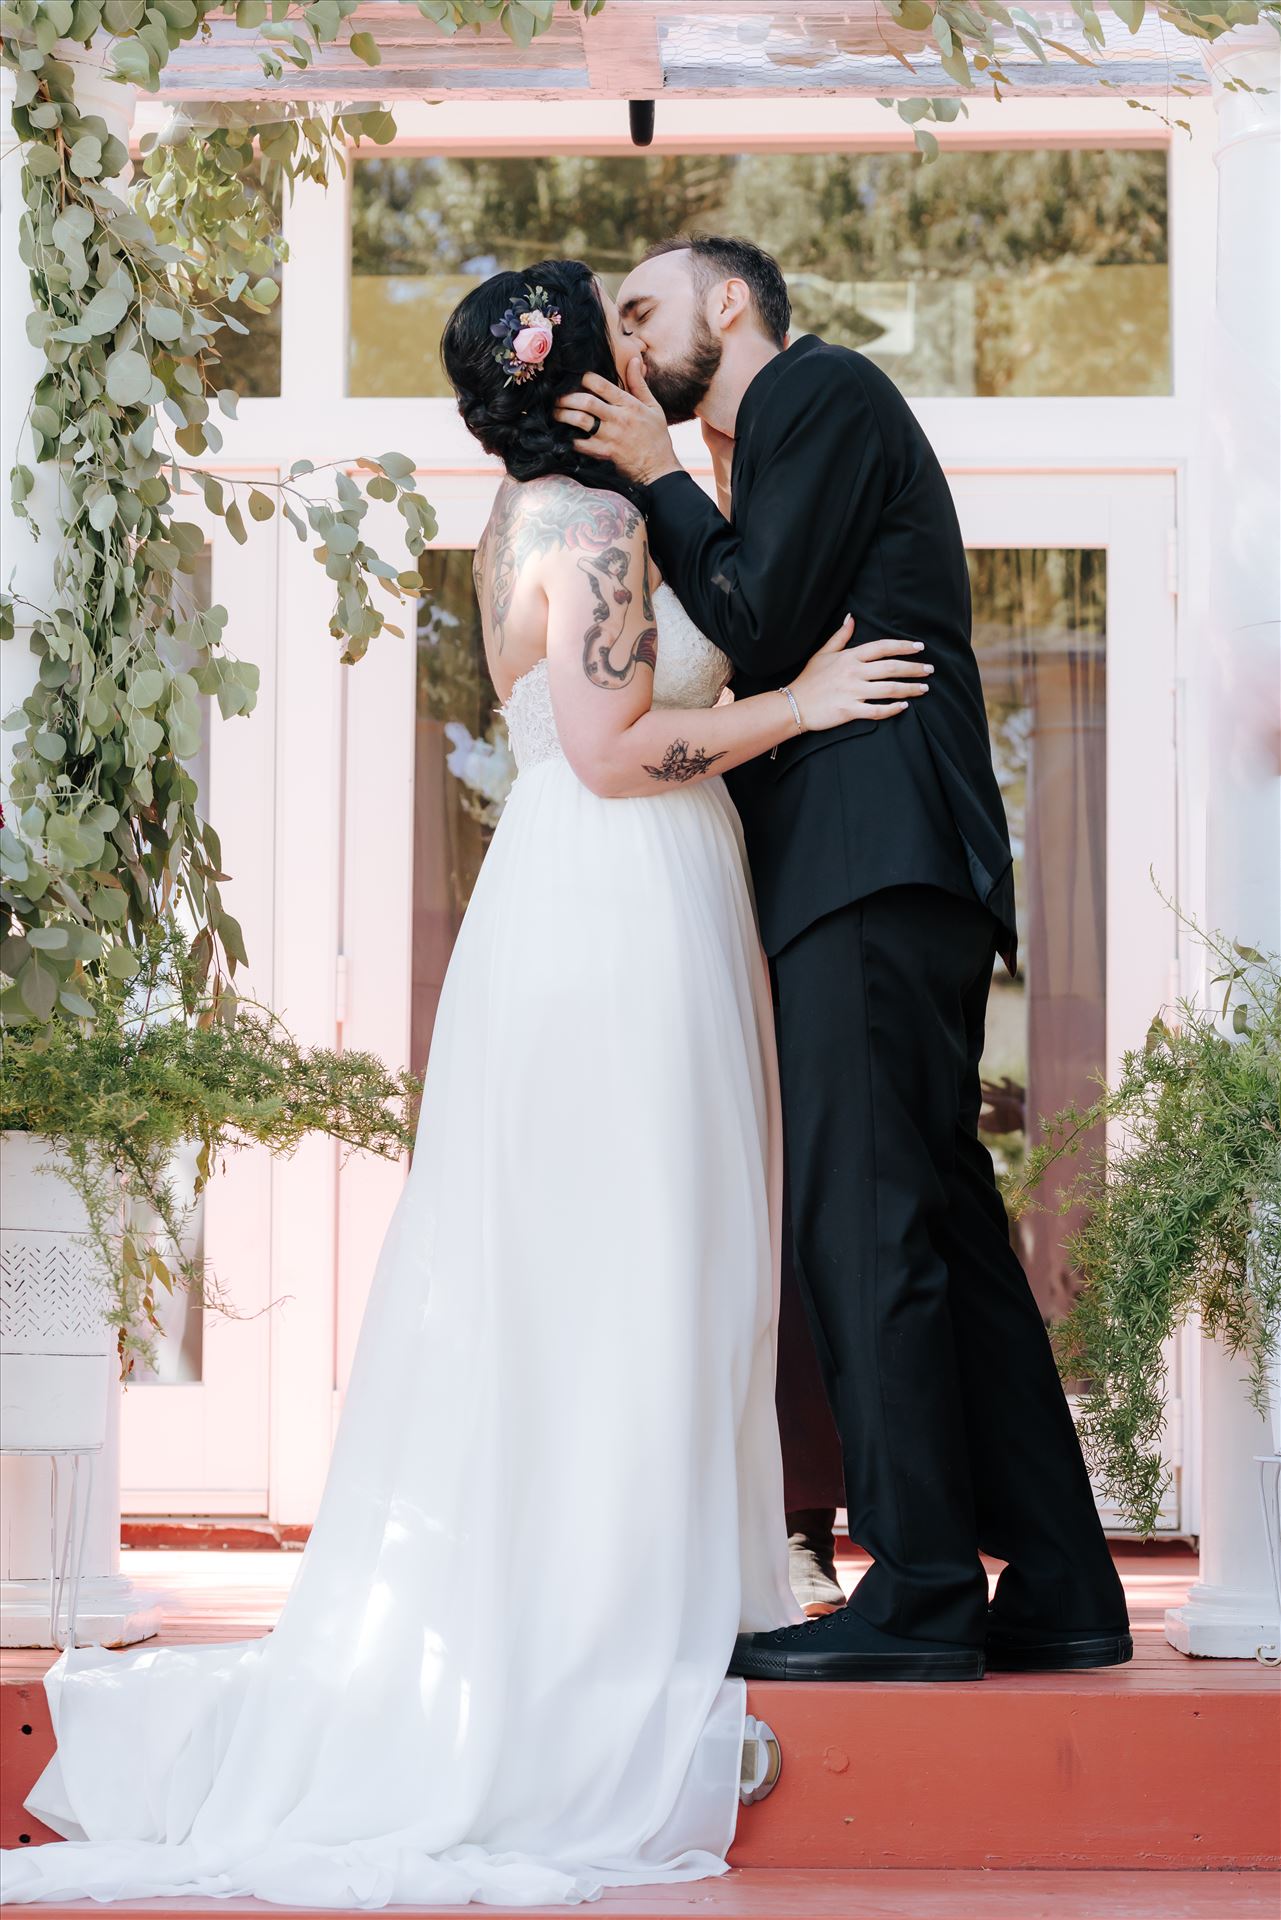 Kendra and Mitchell 062 - Emily House Bed and Breakfast Paso Robles California Wedding Photography by Mirrors Edge Photography.  Bride and Groom kiss by Sarah Williams